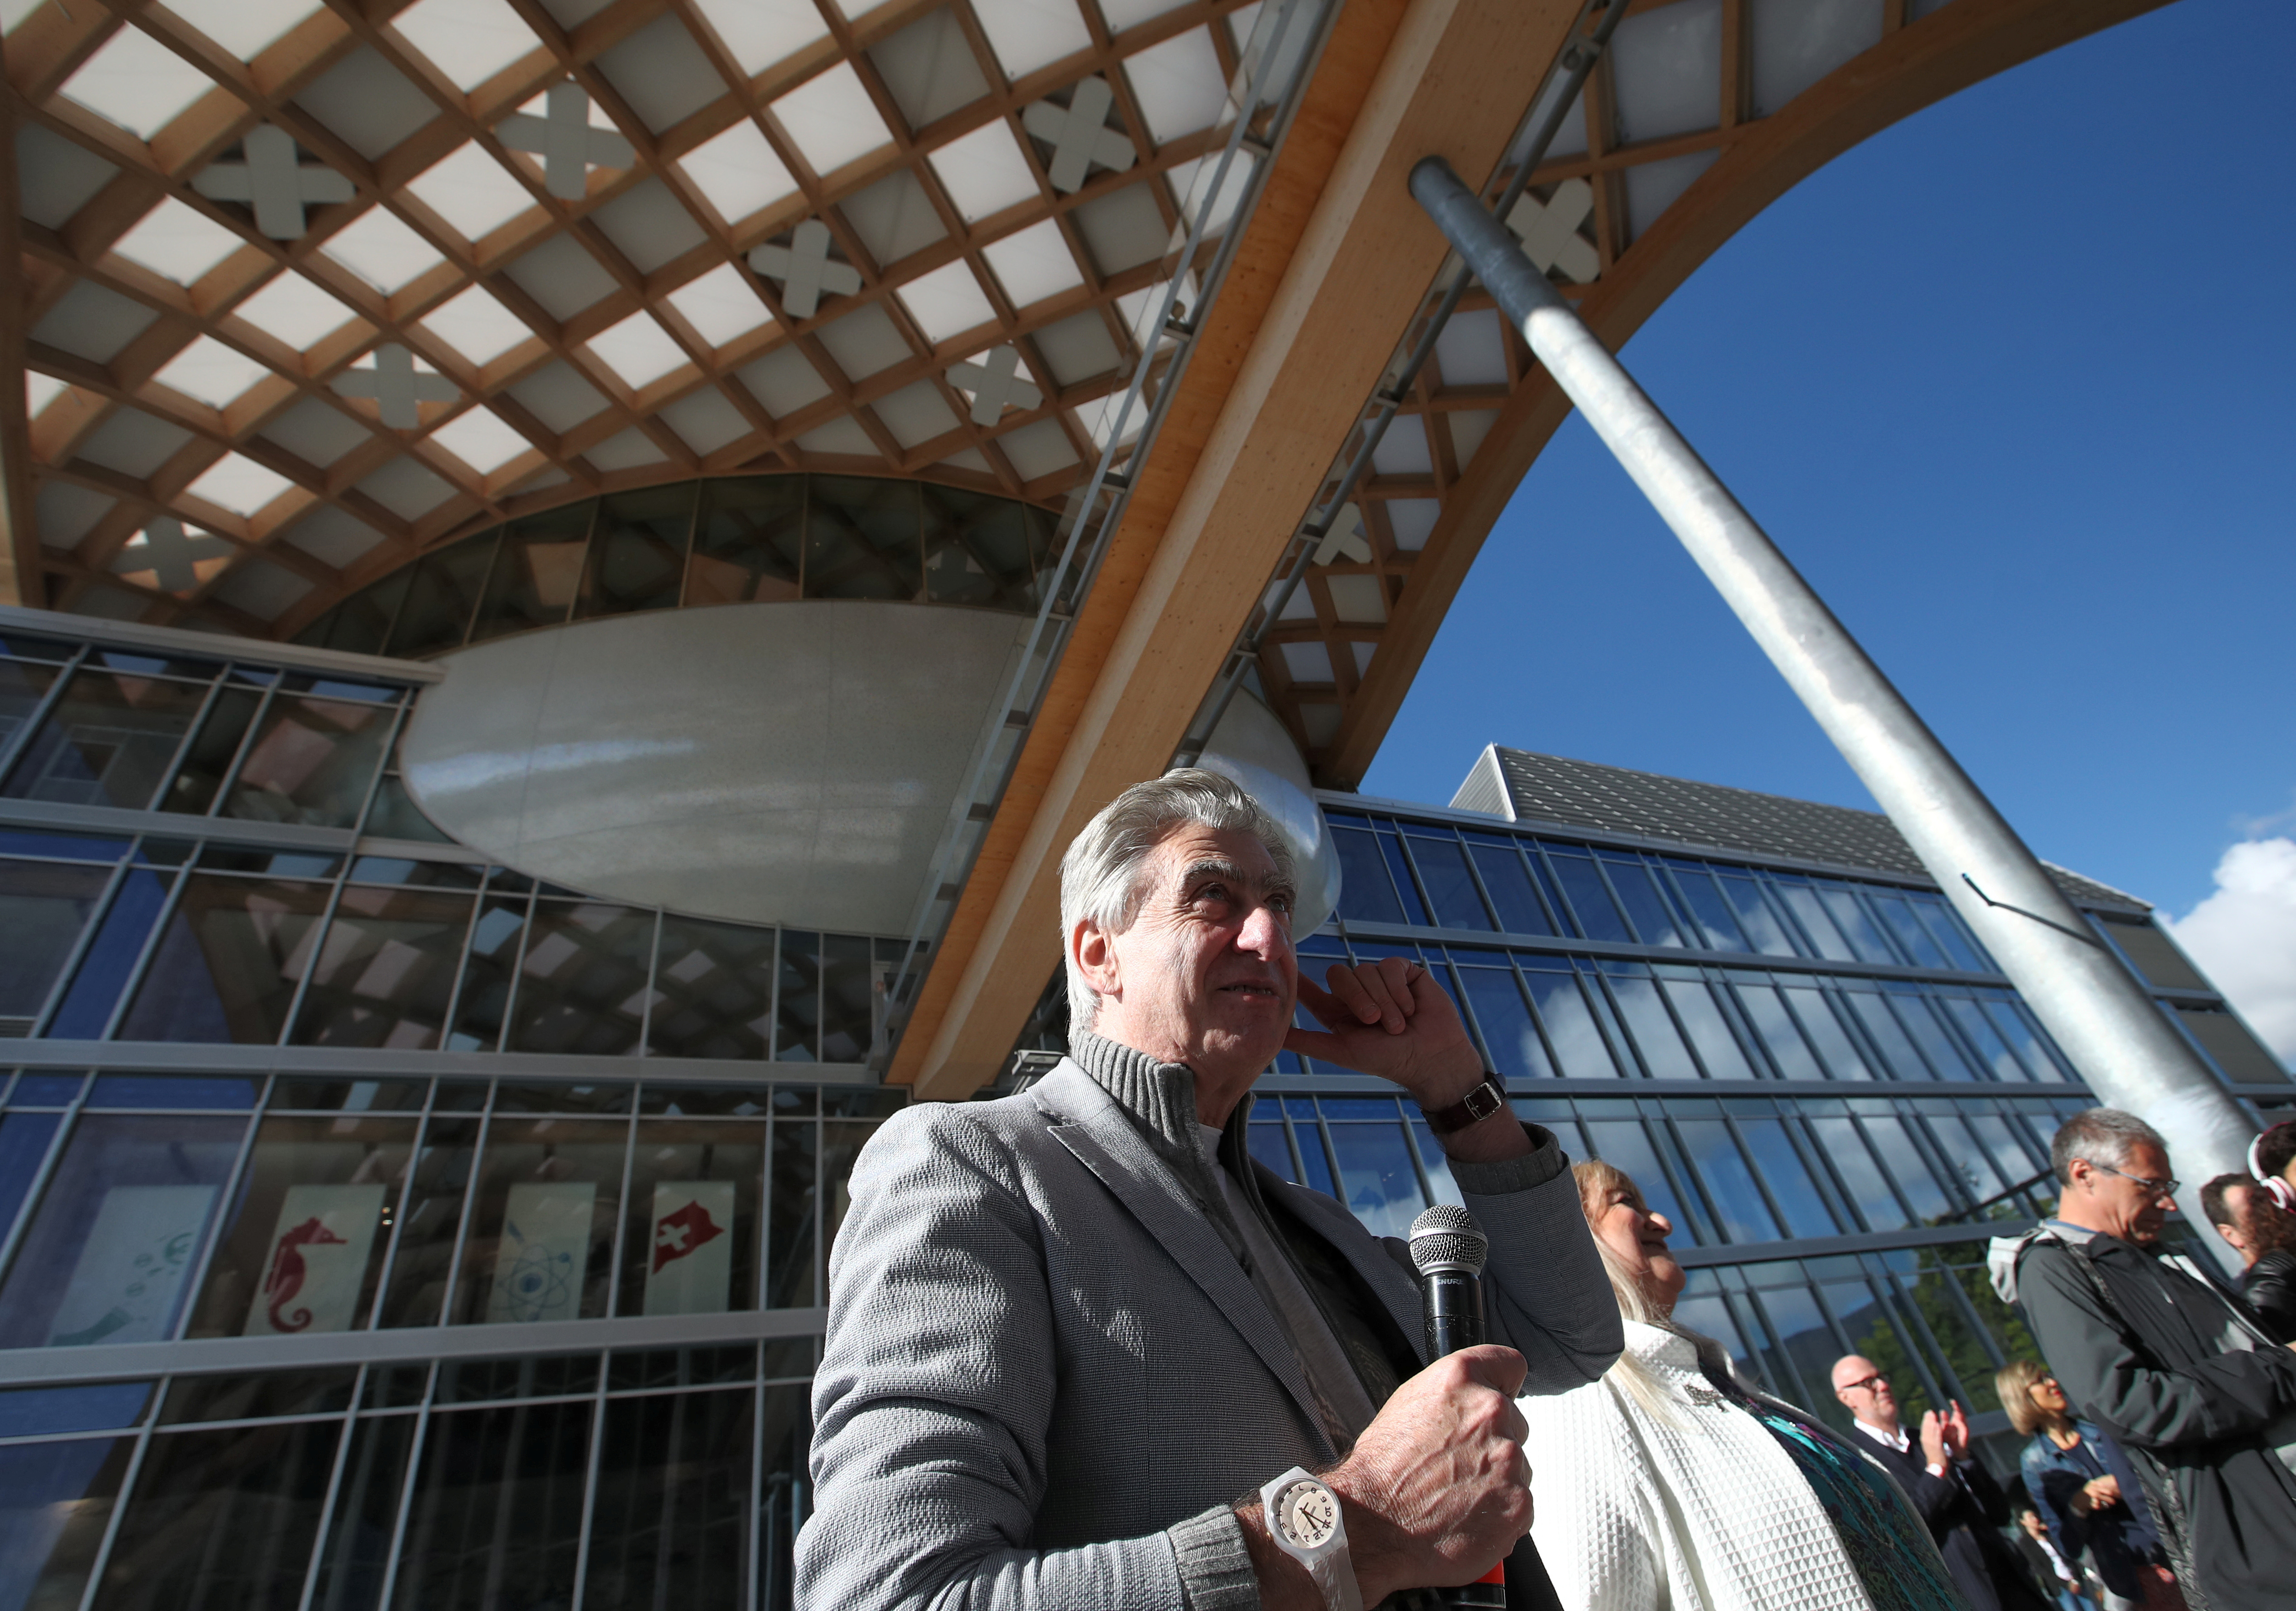 CEO of the Swatch Group Nick Hayek attends the opening of the newly built headquarters of the Swatch brand, designed by Japanese architect Shigeru Ban, in Biel, Switzerland October 3, 2019. REUTERS/Denis Balibouse